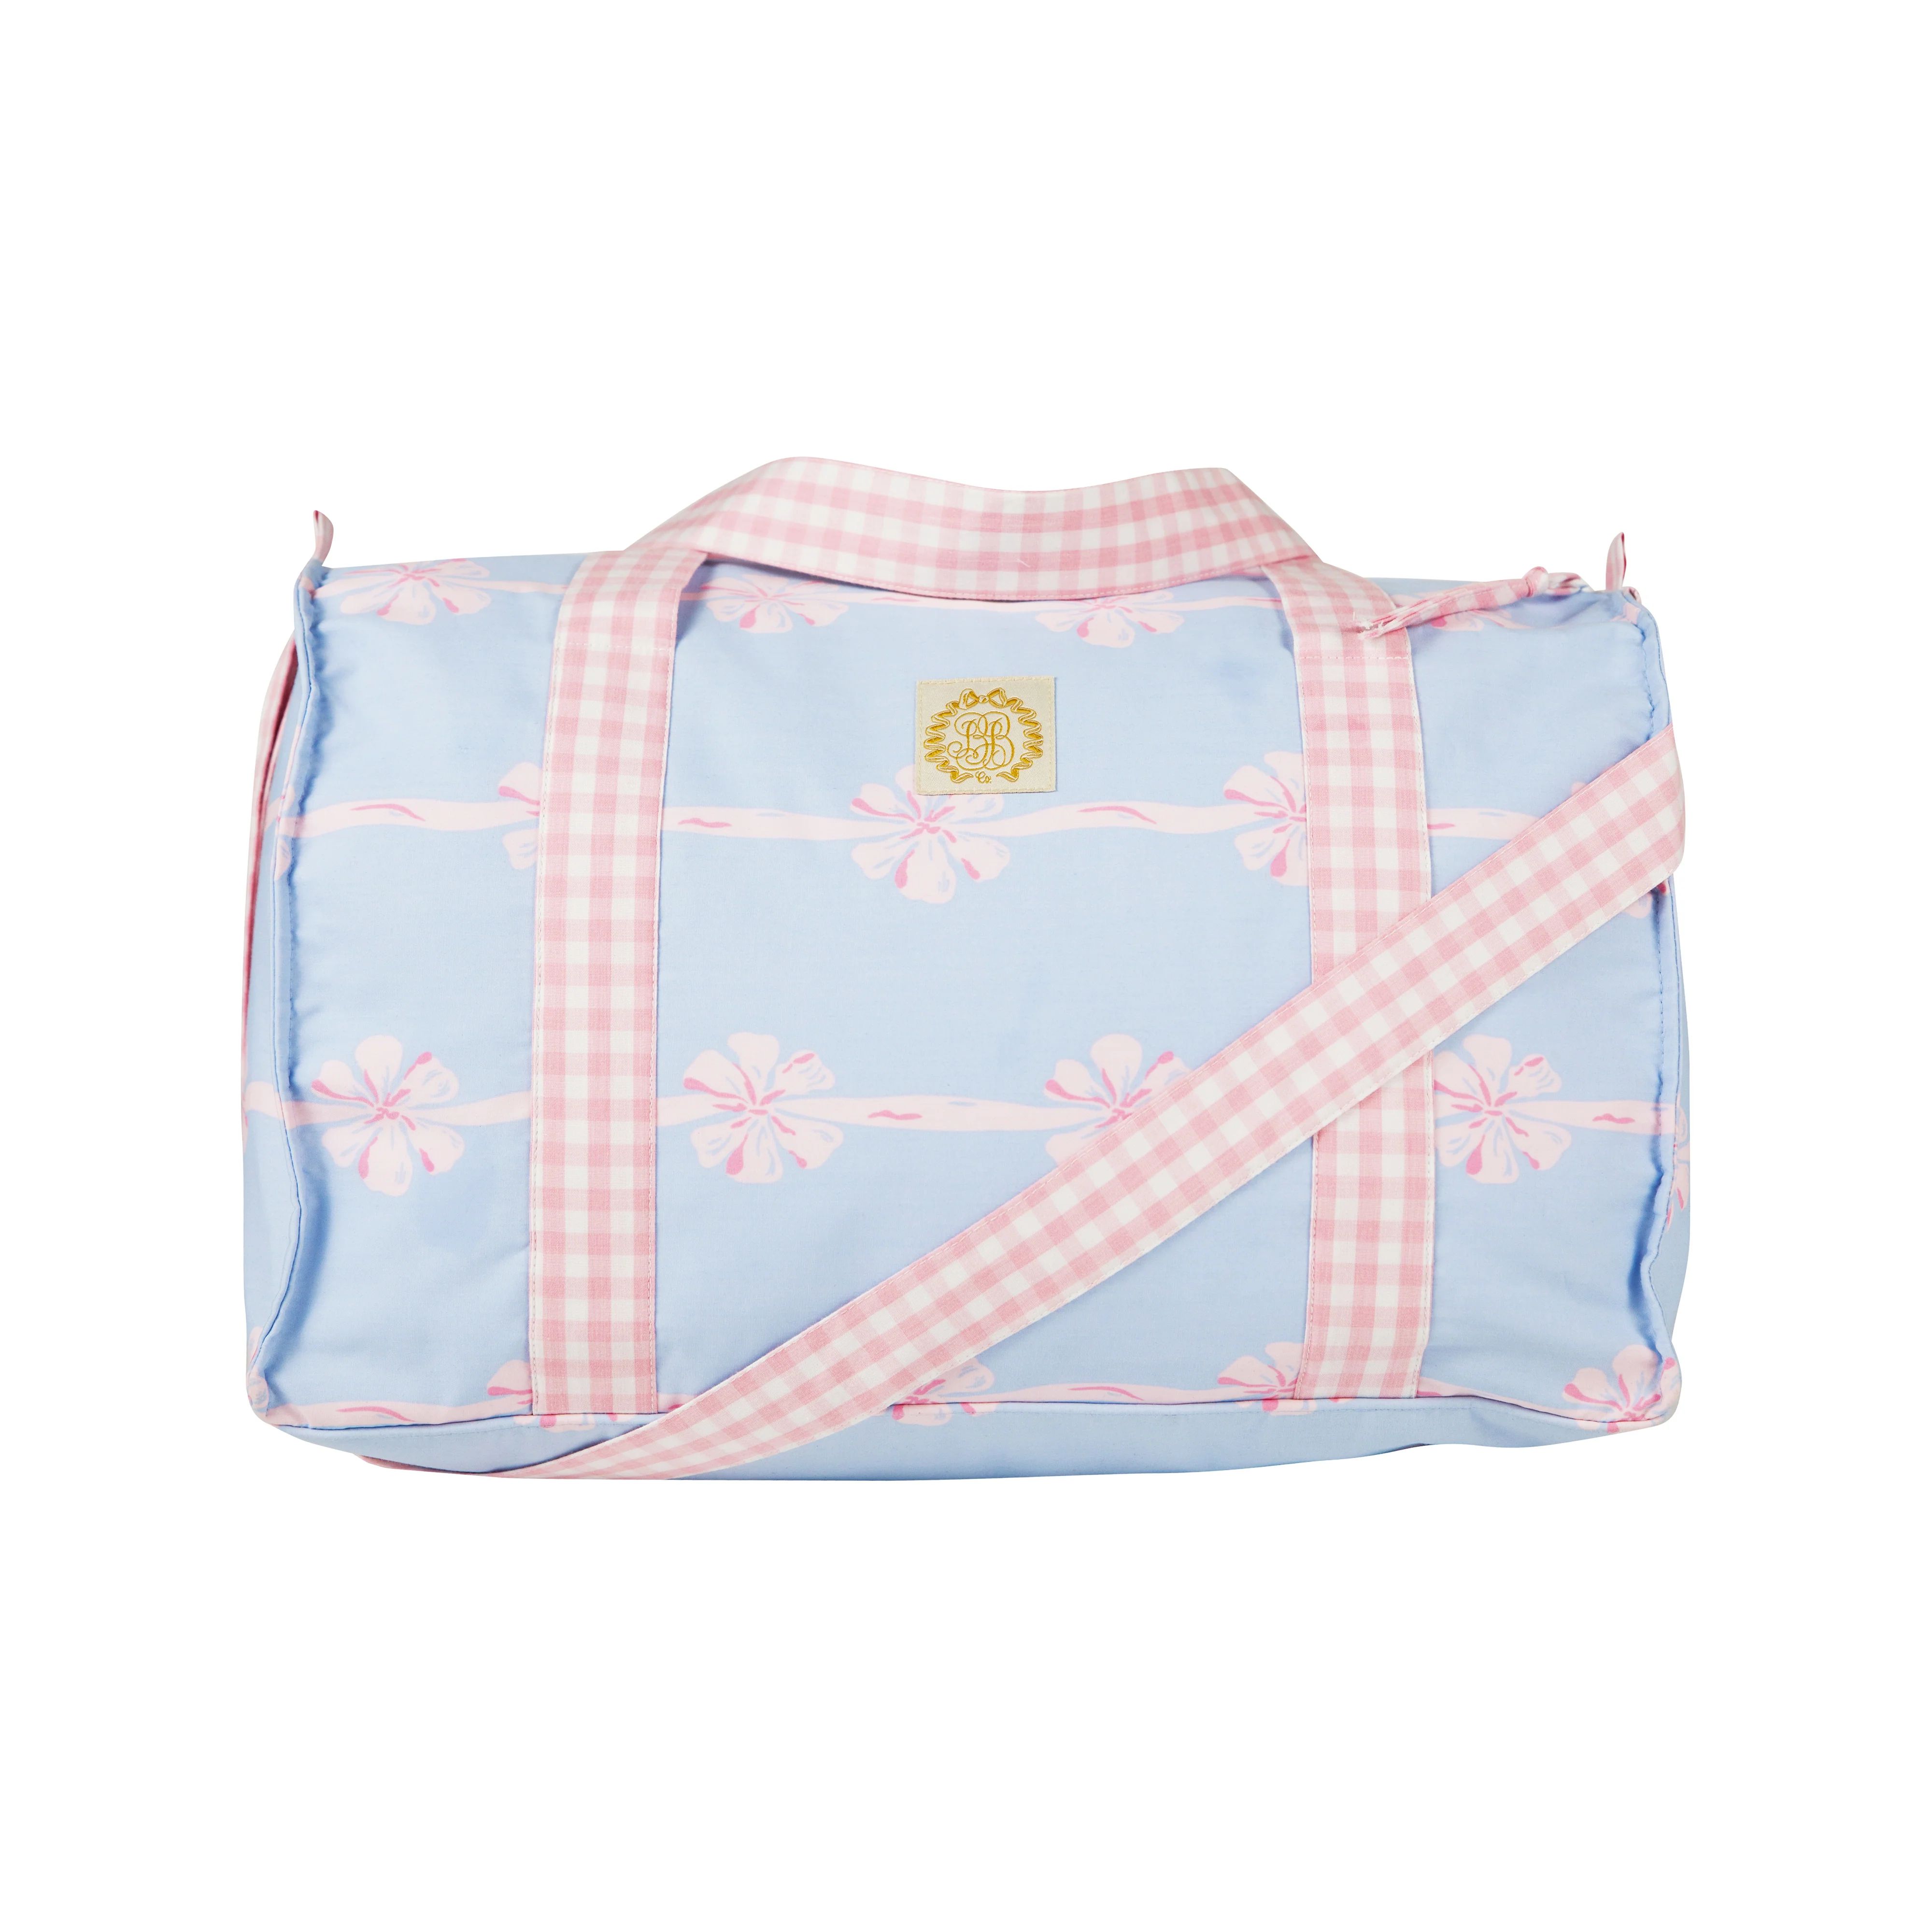 Stewart Sleepover Tote - No Bow, No Go with Sandpearl Pink Gingham | The Beaufort Bonnet Company